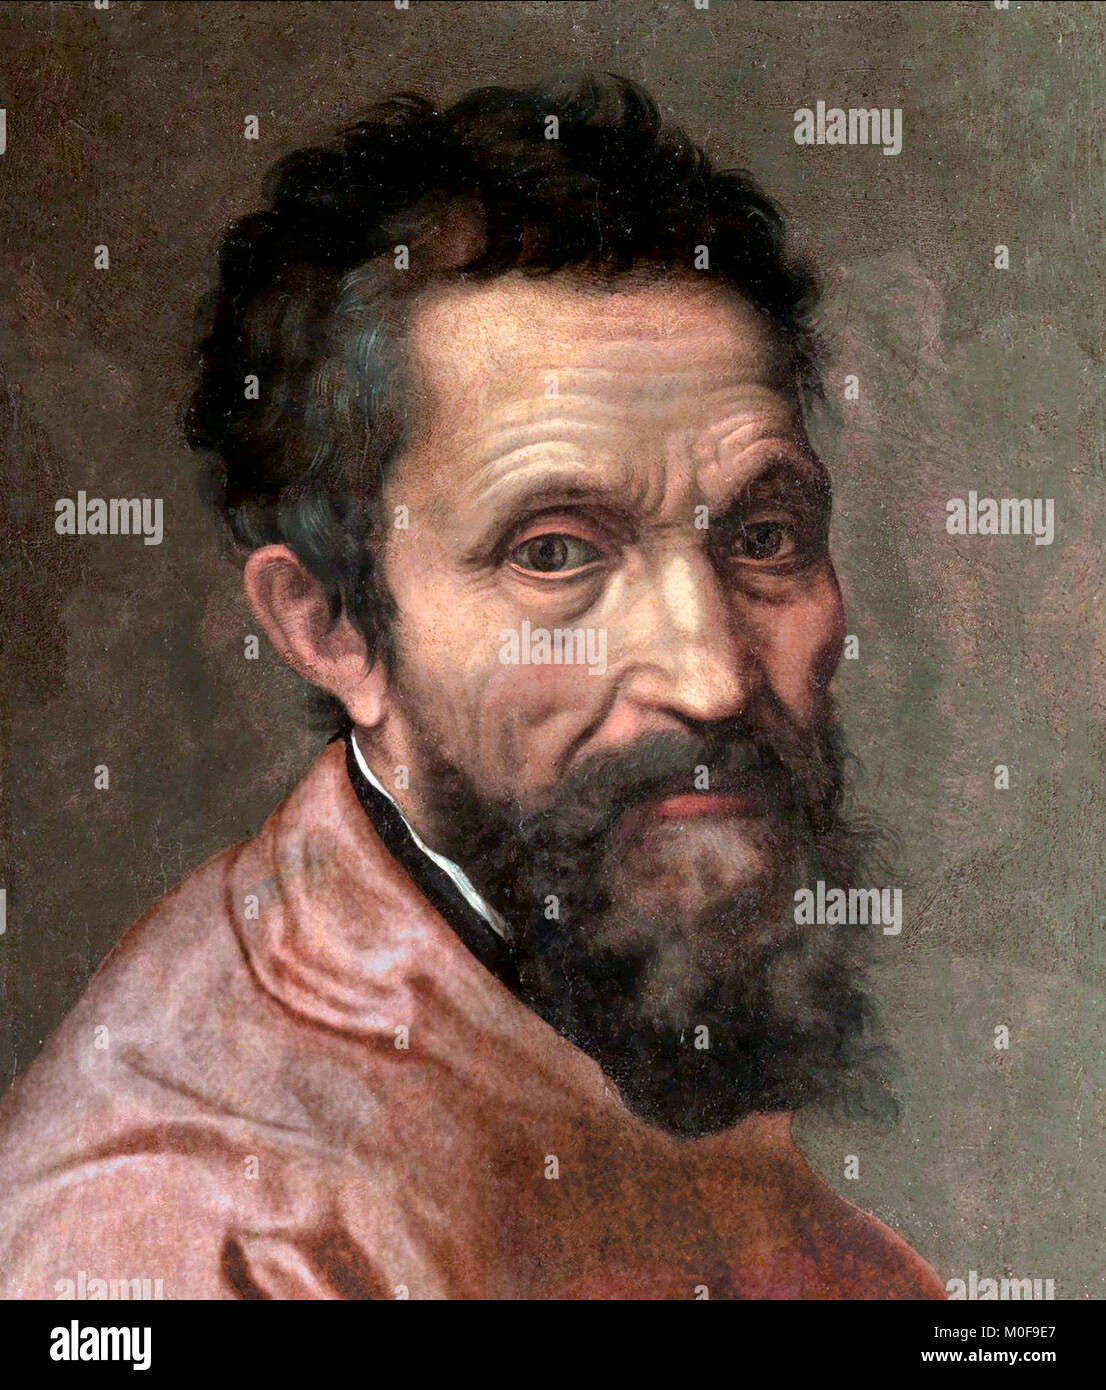 Michelangelo. Portrait of Michelangelo di Lodovico Buonarroti Simoni (1475-1564) by Daniele da Volterra, oil on panel, c.1544. This is a digitally retouched image from a crop of a larger unfinished painting. Stock Photo